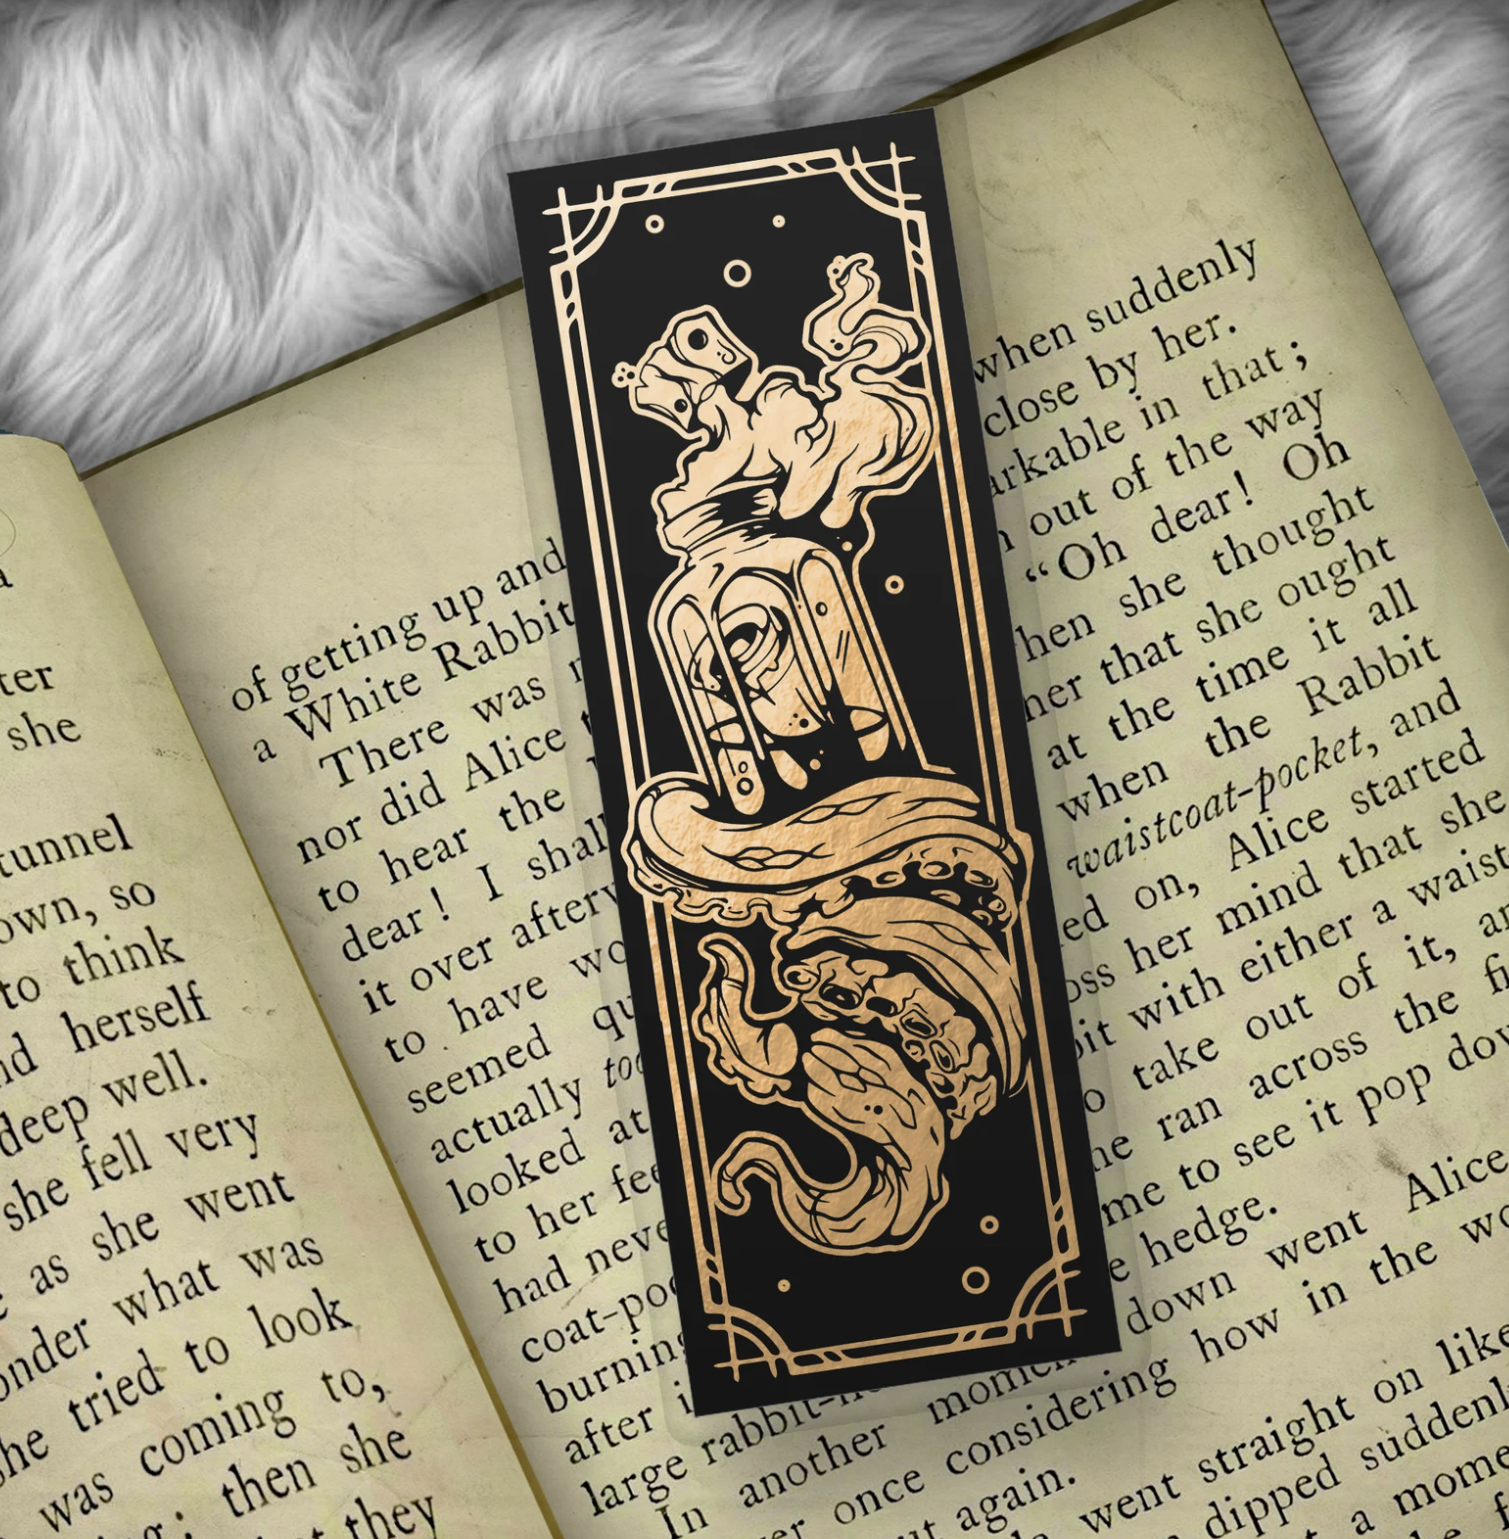 Black bookmark with a foil print of a message in a bottle with a tentacle wrapped around it laid against an open book.